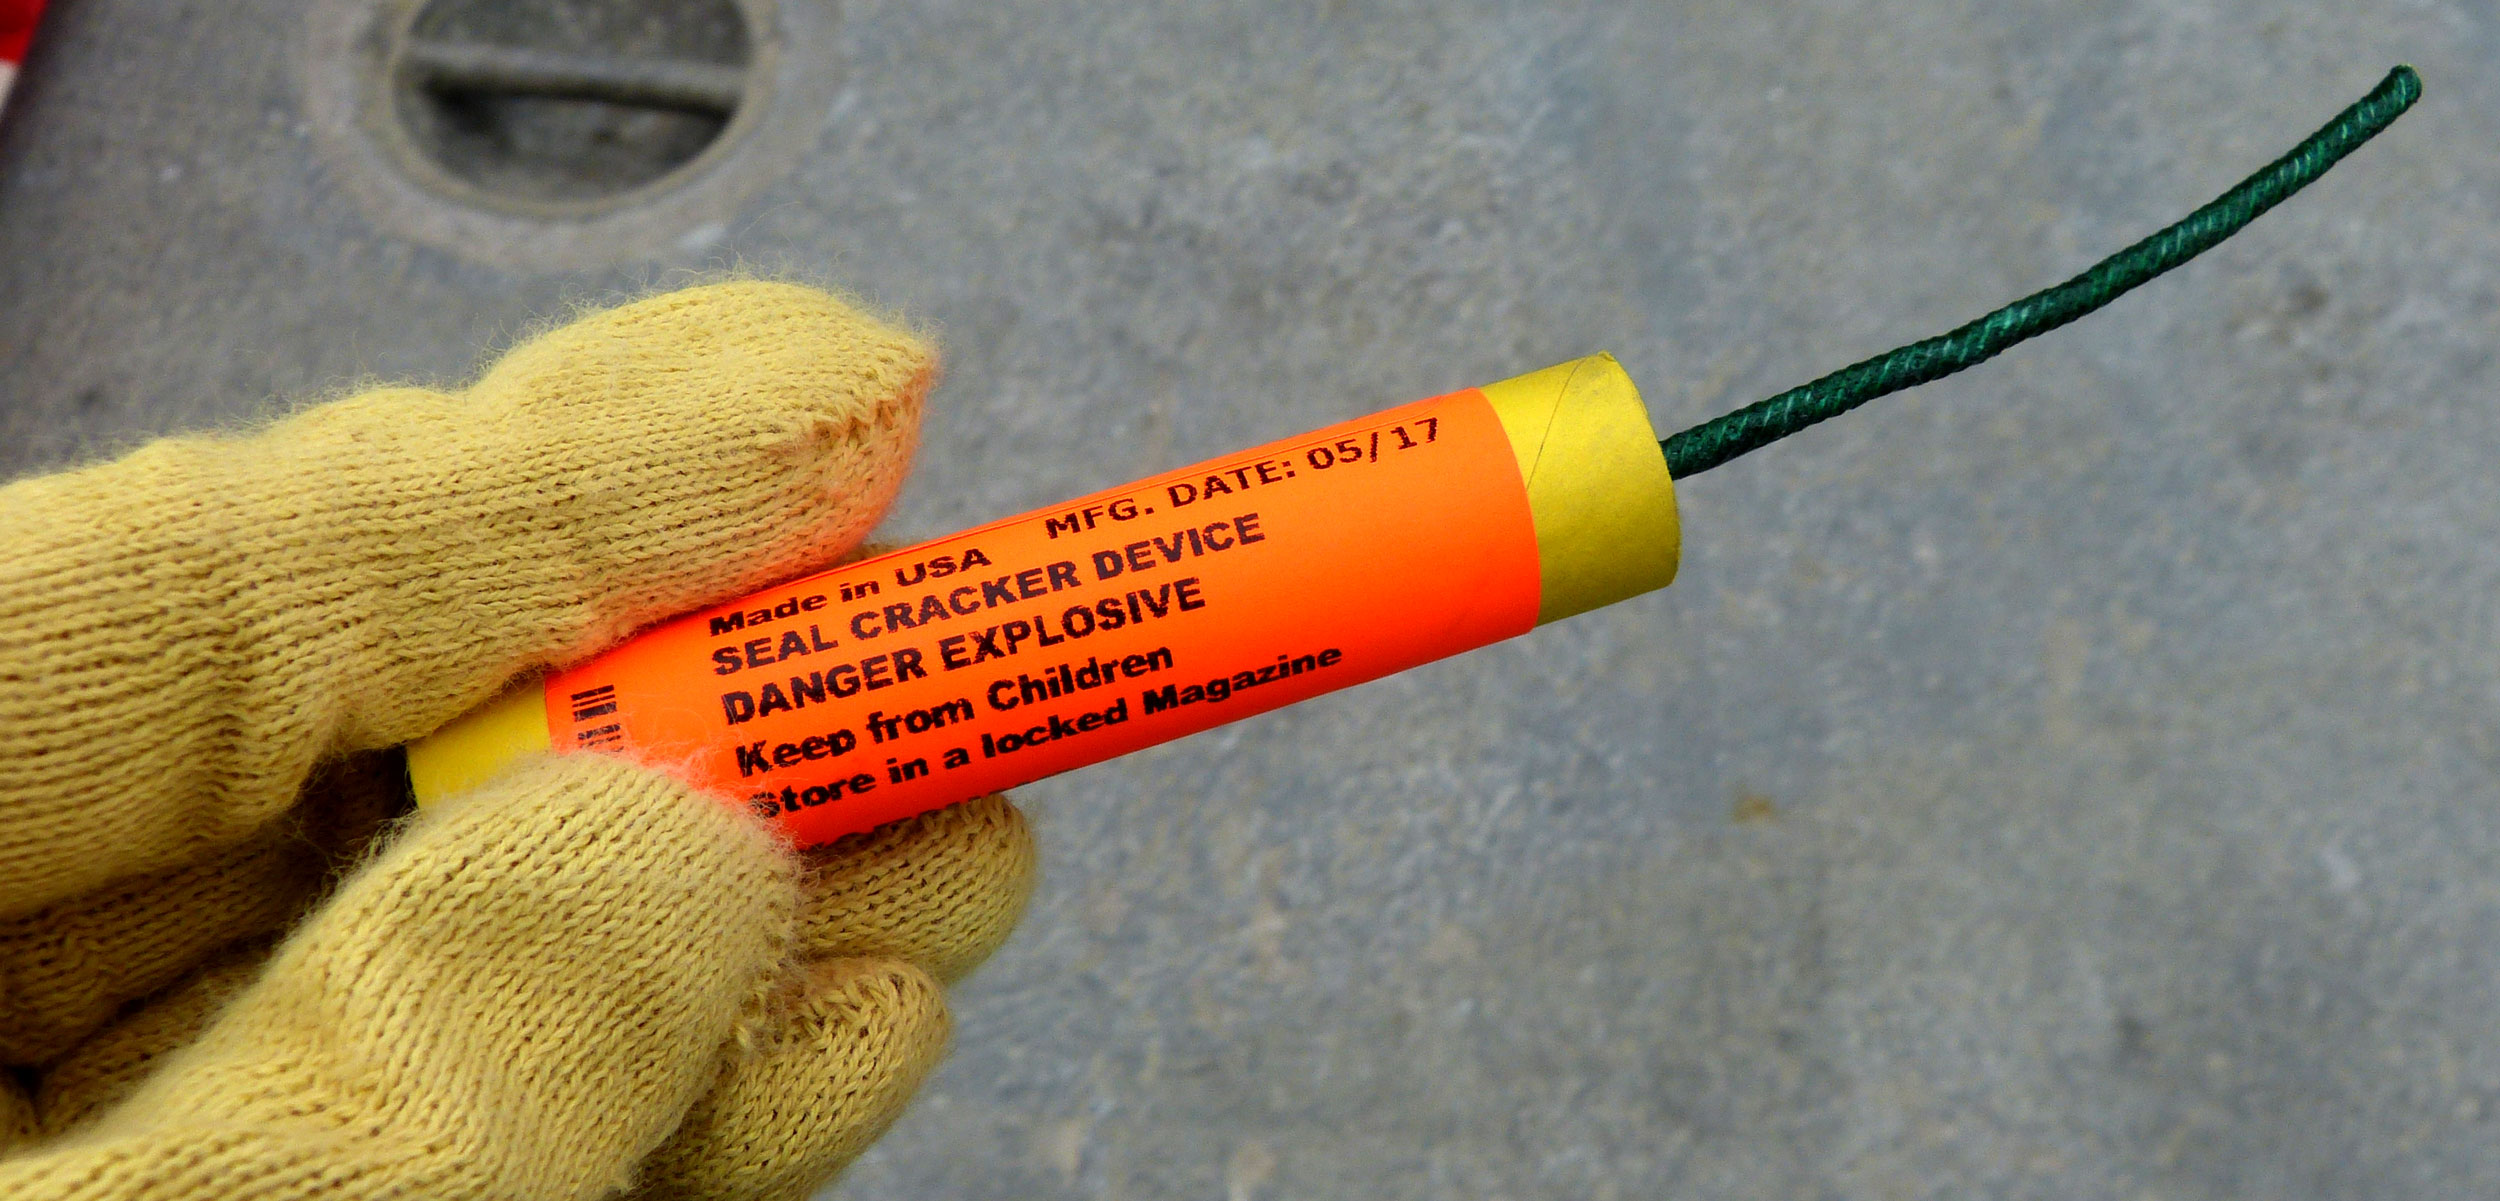 a seal bomb explosive device